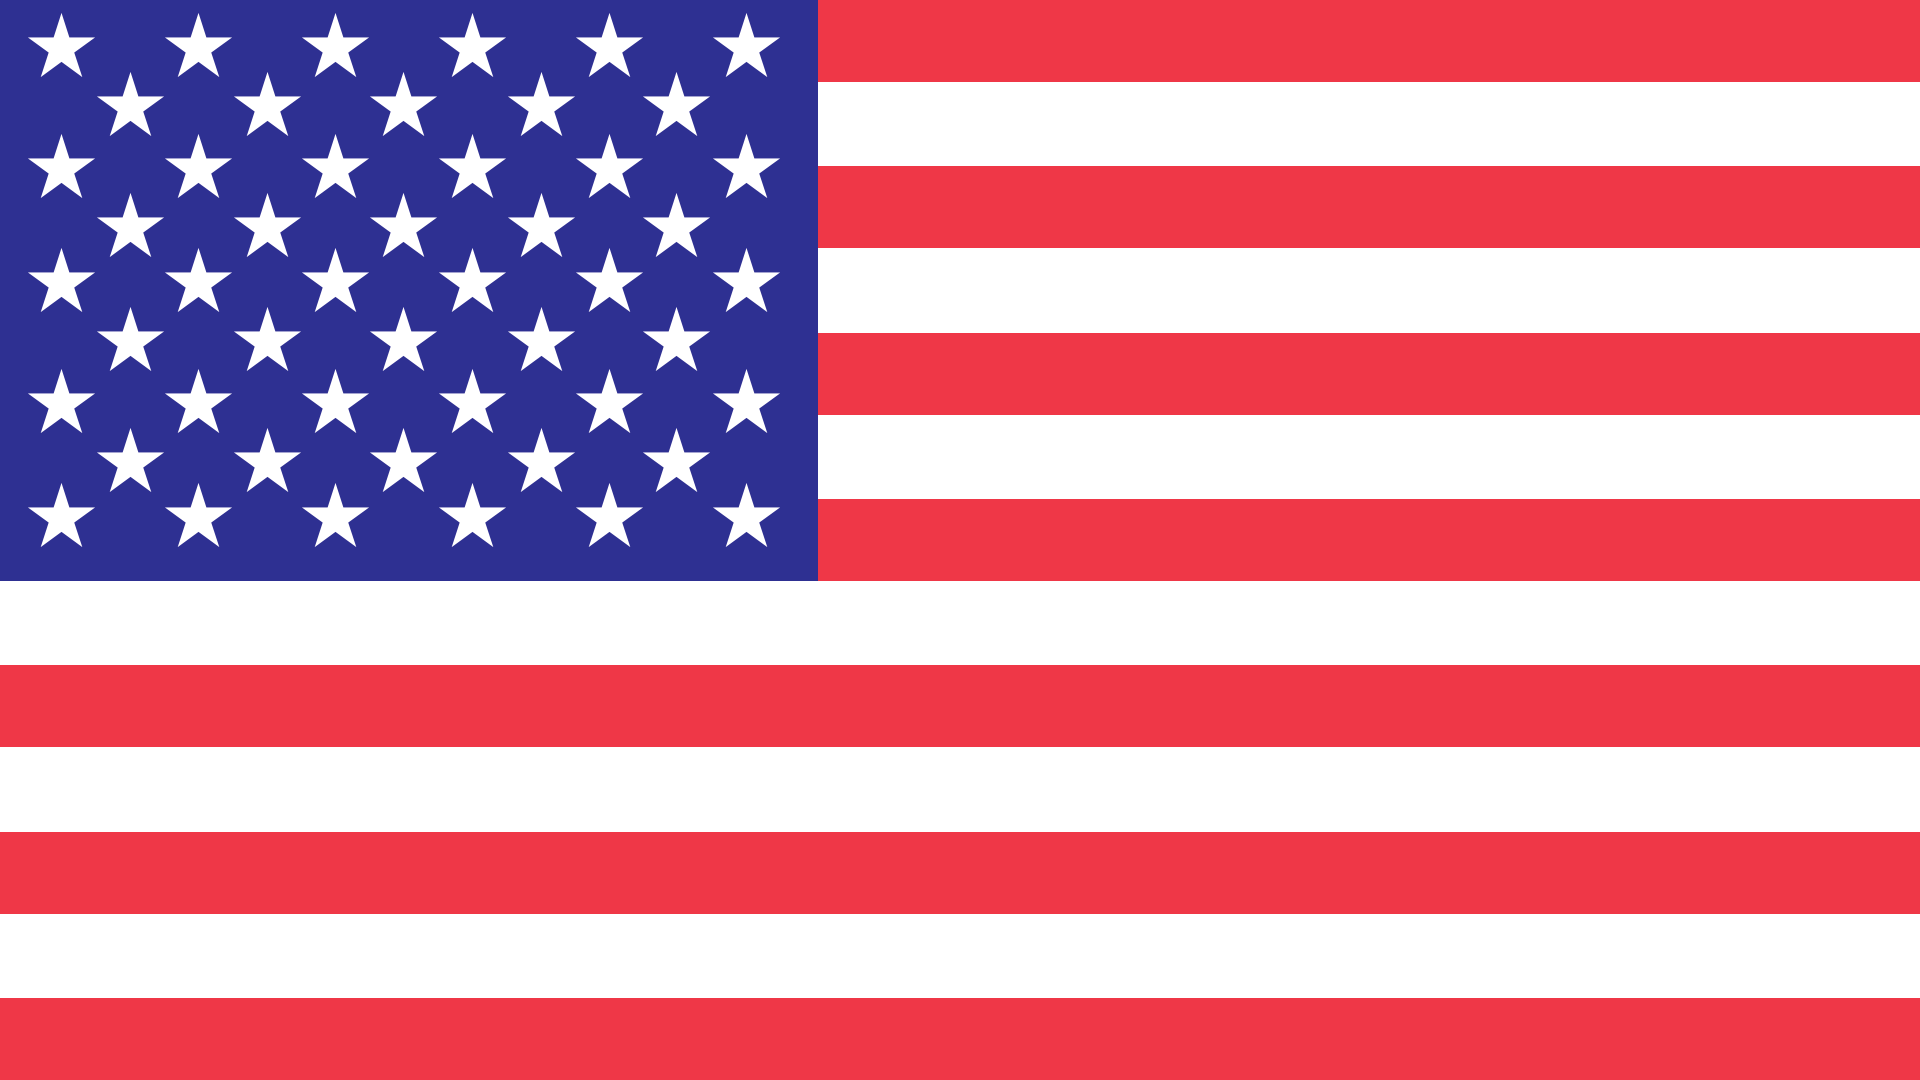 Animated illustration of an American flag transforming into a Chinese flag.